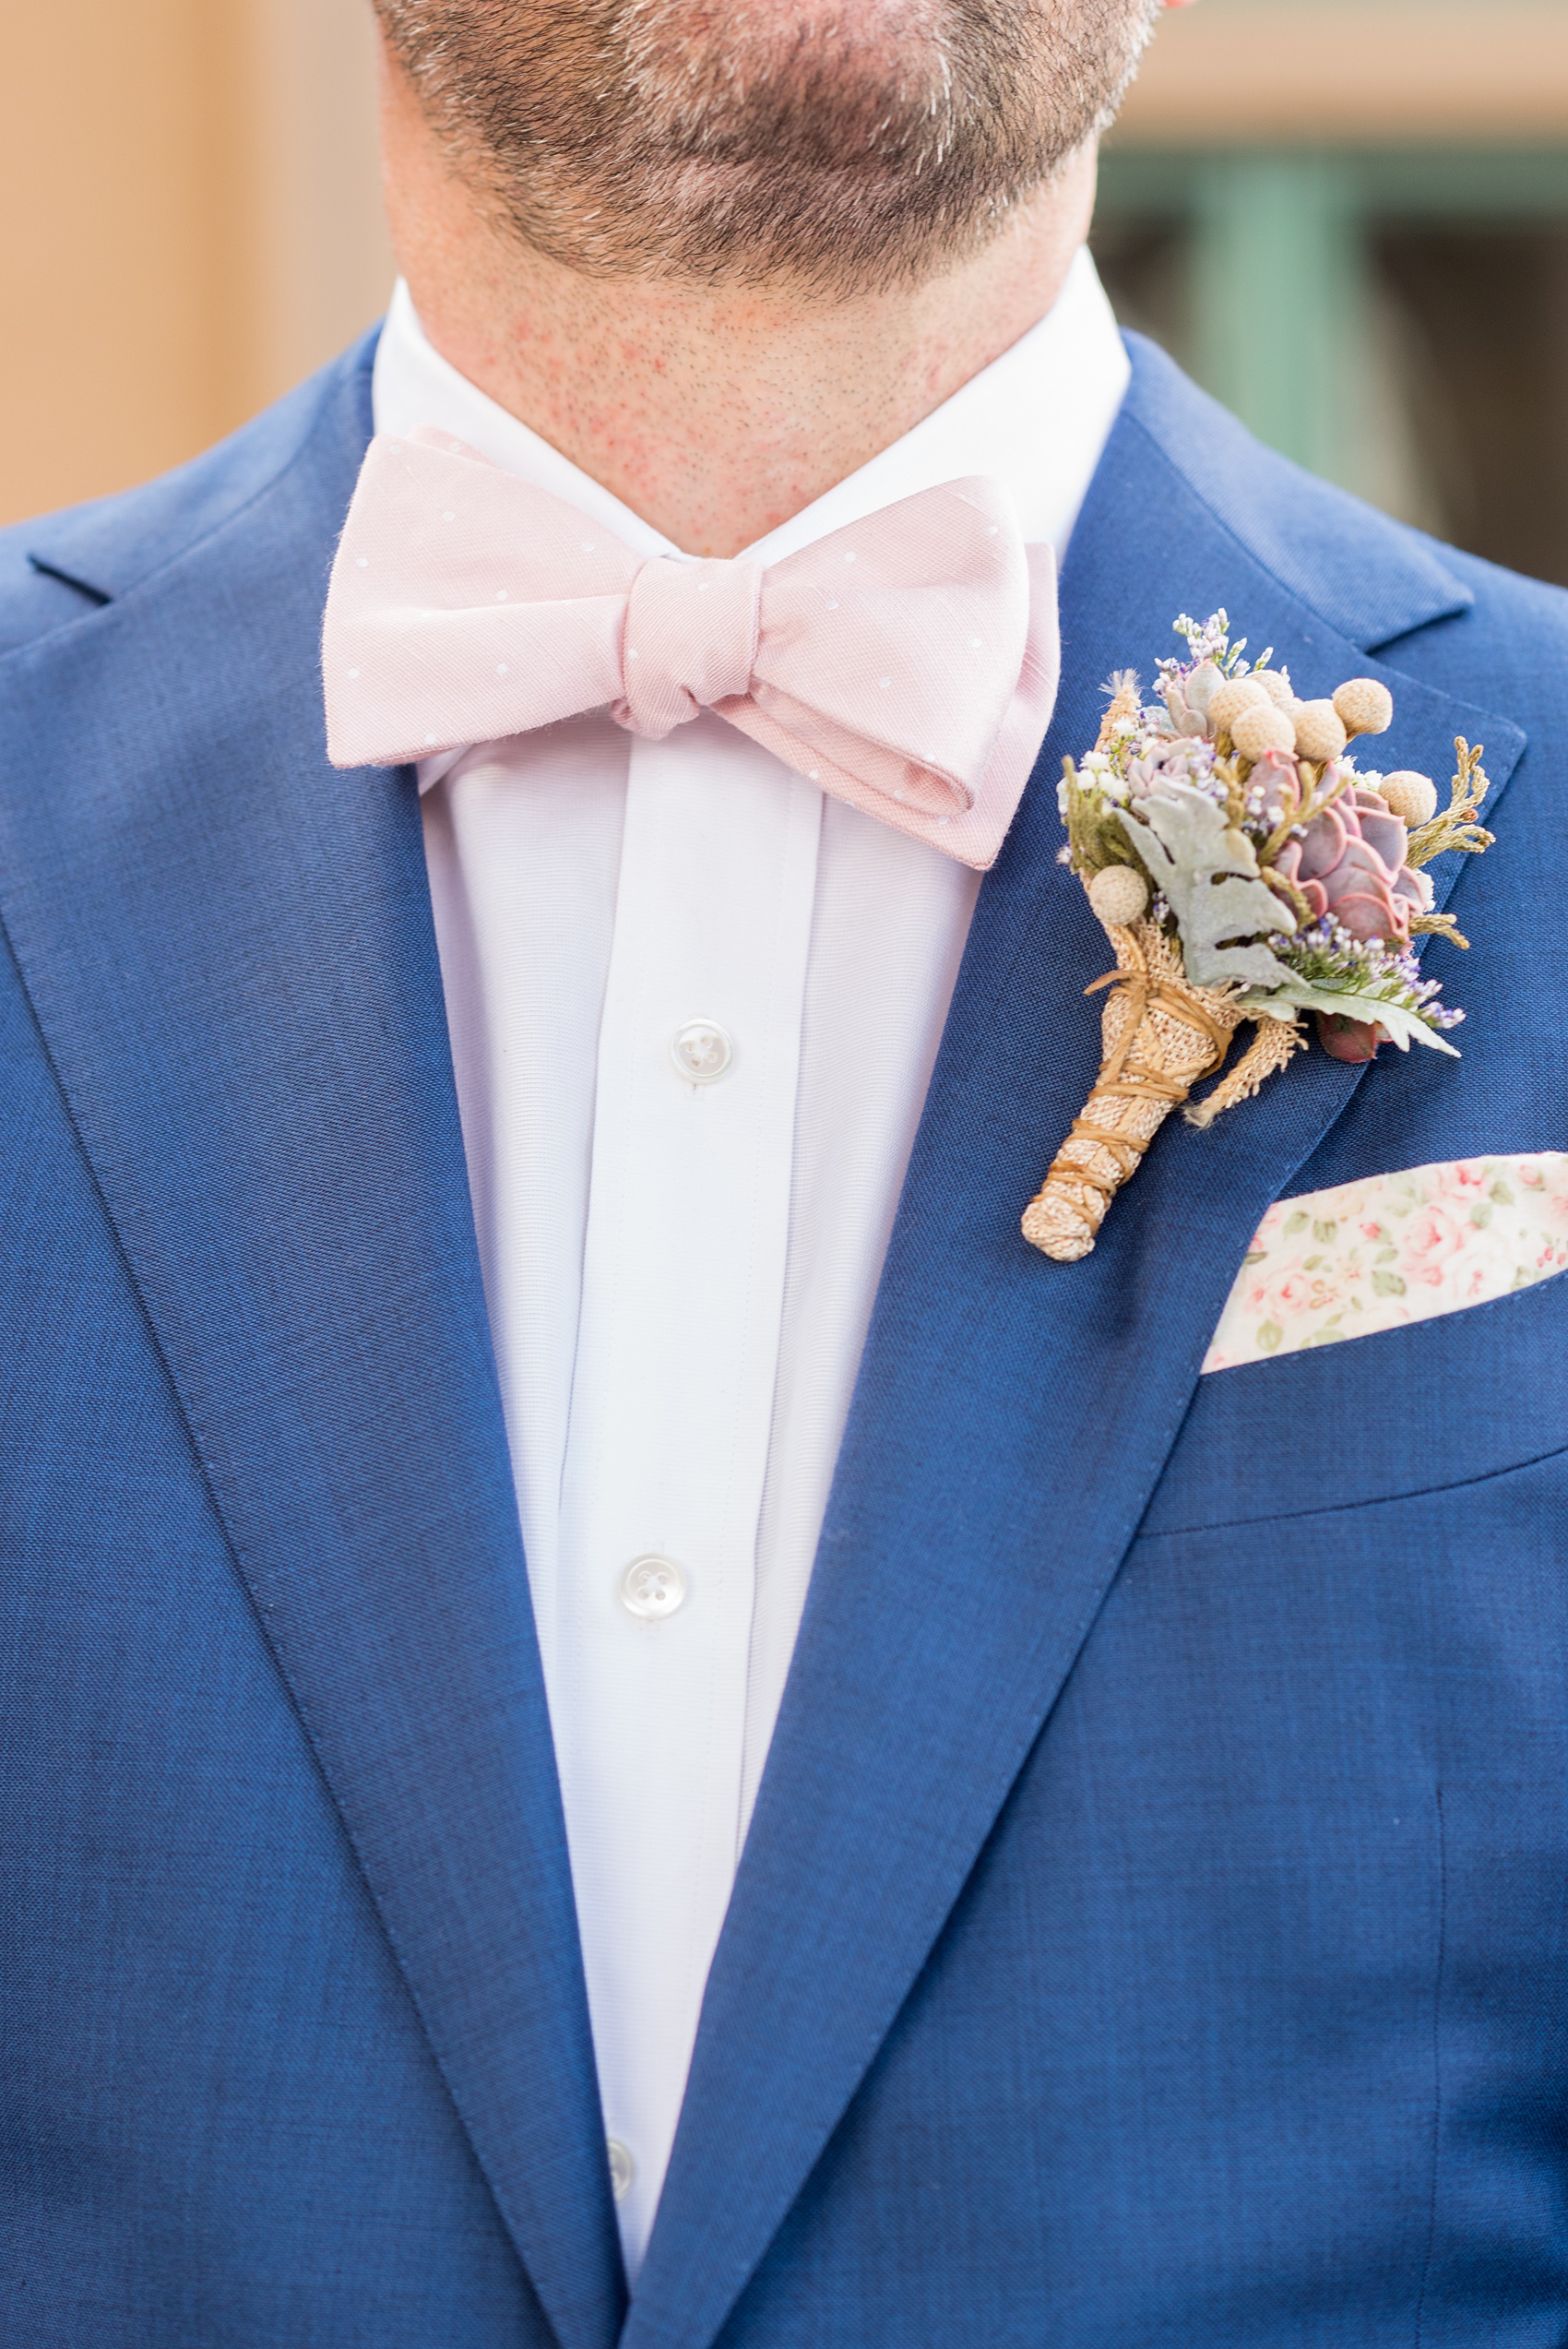 Crystal Springs Resort wedding photos in New Jersey, with photographer Mikkel Paige Photography. The couple’s spring wedding had an outdoor ceremony with photos at this rustic, woodsy venue showing their blue and pink palette decor from getting ready to their reception. This picture shows the groom in his custom navy blue suit with a succulent boutonniere. Click through to see their complete wedding recap! #NewJerseywedding #MikkelPaige #NJweddingphotographer #NJphotographer #customsuit #groom #weddingdetails #pinkbowtie